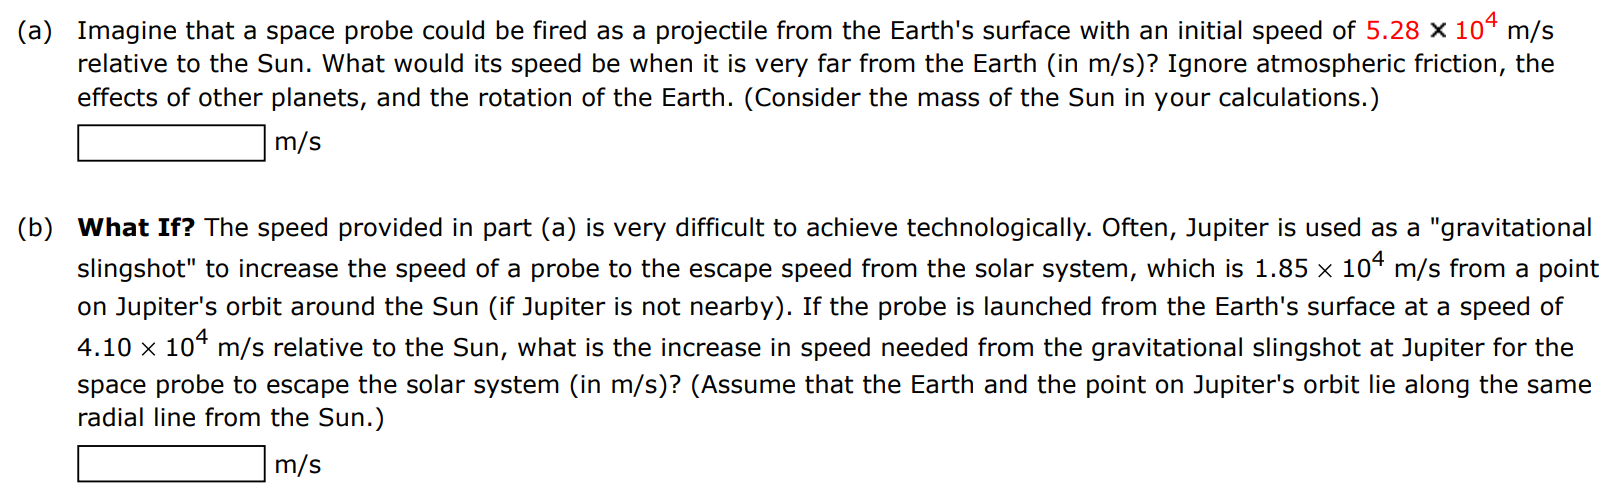 (a) Imagine that a space probe could be fired as a projectile from the Earth's surface with an initial speed of 5.28×104 m/s relative to the Sun. What would its speed be when it is very far from the Earth (in m/s )? Ignore atmospheric friction, the effects of other planets, and the rotation of the Earth. (Consider the mass of the Sun in your calculations.) m/s (b) What If? The speed provided in part (a) is very difficult to achieve technologically. Often, Jupiter is used as a "gravitational slingshot" to increase the speed of a probe to the escape speed from the solar system, which is 1.85×104 m/s from a point on Jupiter's orbit around the Sun (if Jupiter is not nearby). If the probe is launched from the Earth's surface at a speed of 4.10×104 m/s relative to the Sun, what is the increase in speed needed from the gravitational slingshot at Jupiter for the space probe to escape the solar system (in m/s )? (Assume that the Earth and the point on Jupiter's orbit lie along the same radial line from the Sun.) m/s 